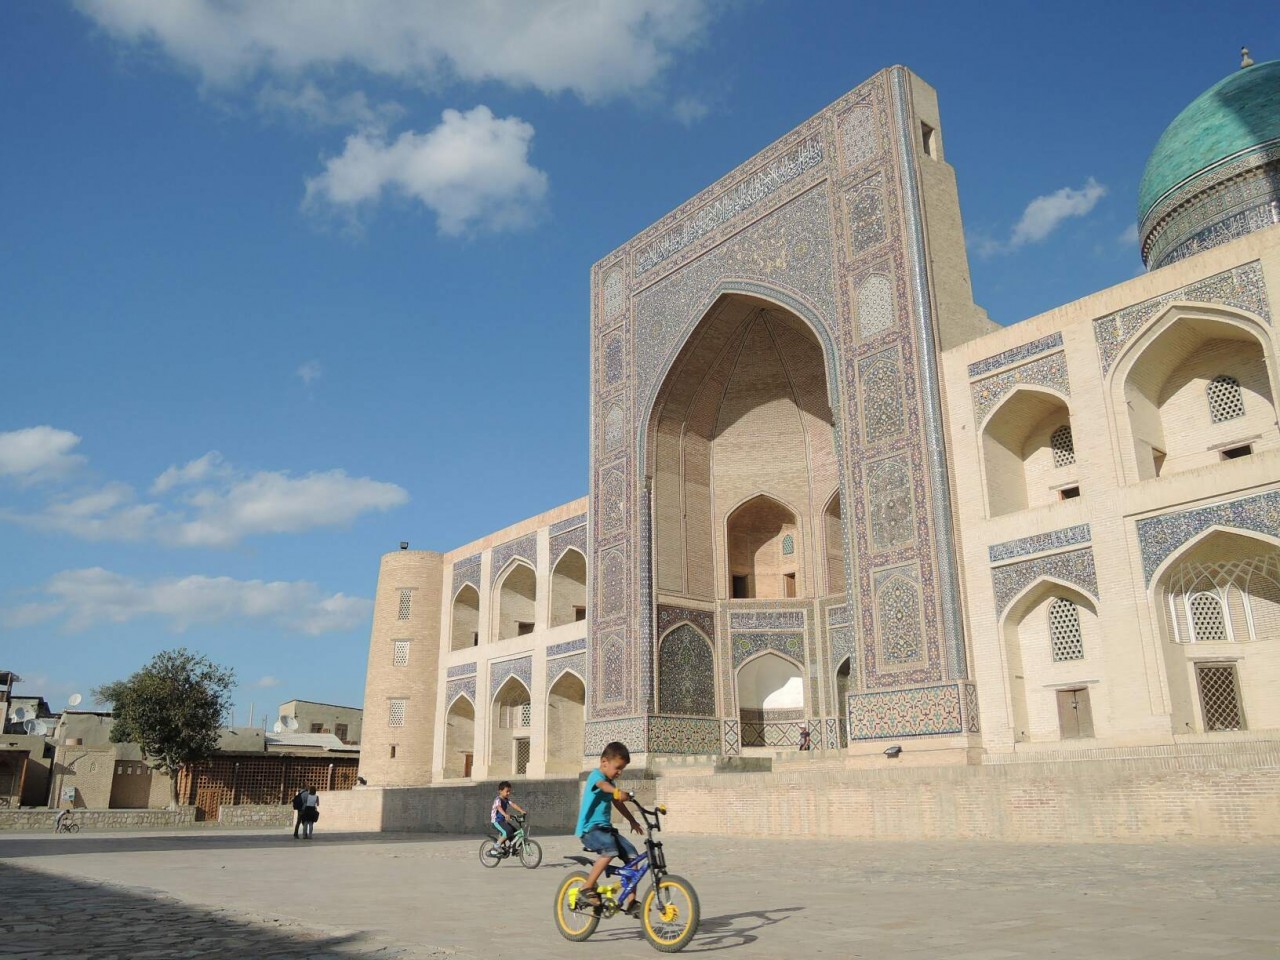 Kids on bycicle in Bukhara